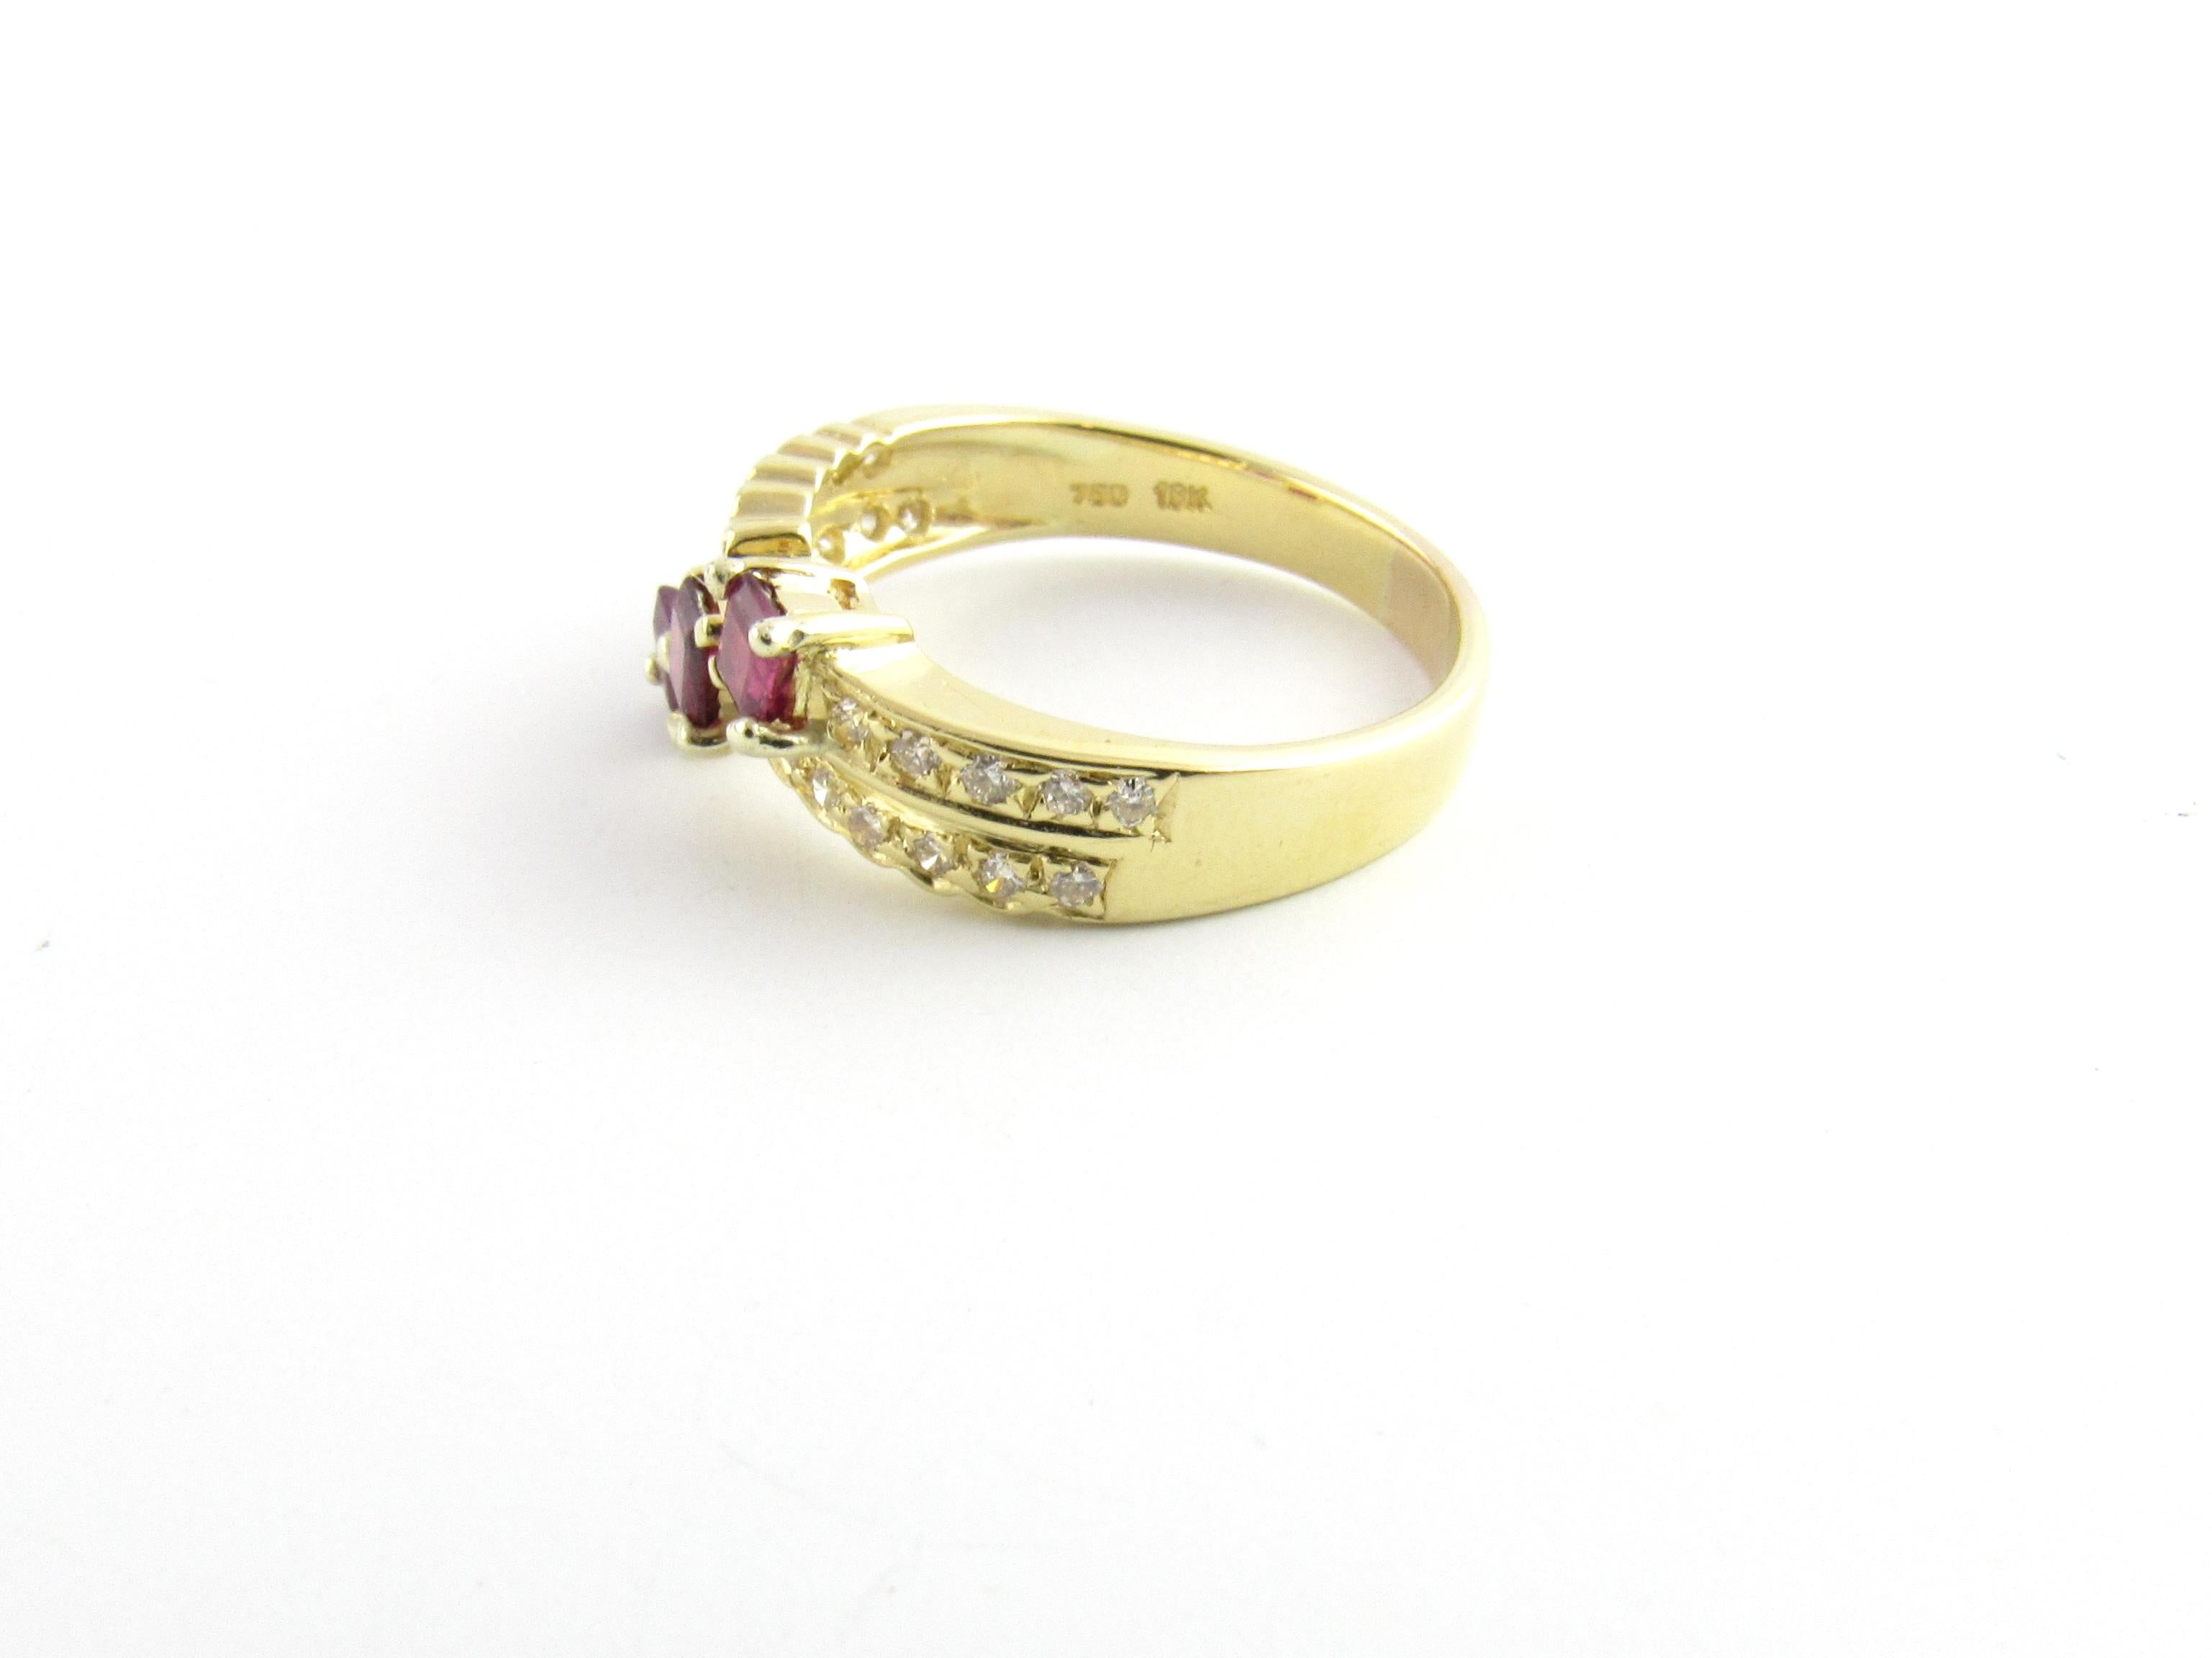 Vintage 18 Karat Yellow Gold Ruby and Diamond Ring Size 8.25

This lovely ring features three square rubies (4 mm x 4 mm) and 22 round brilliant cut diamonds set in classic 14K yellow gold. Width: 8 mm. Shank: 3 mm.

Approximate total diamond